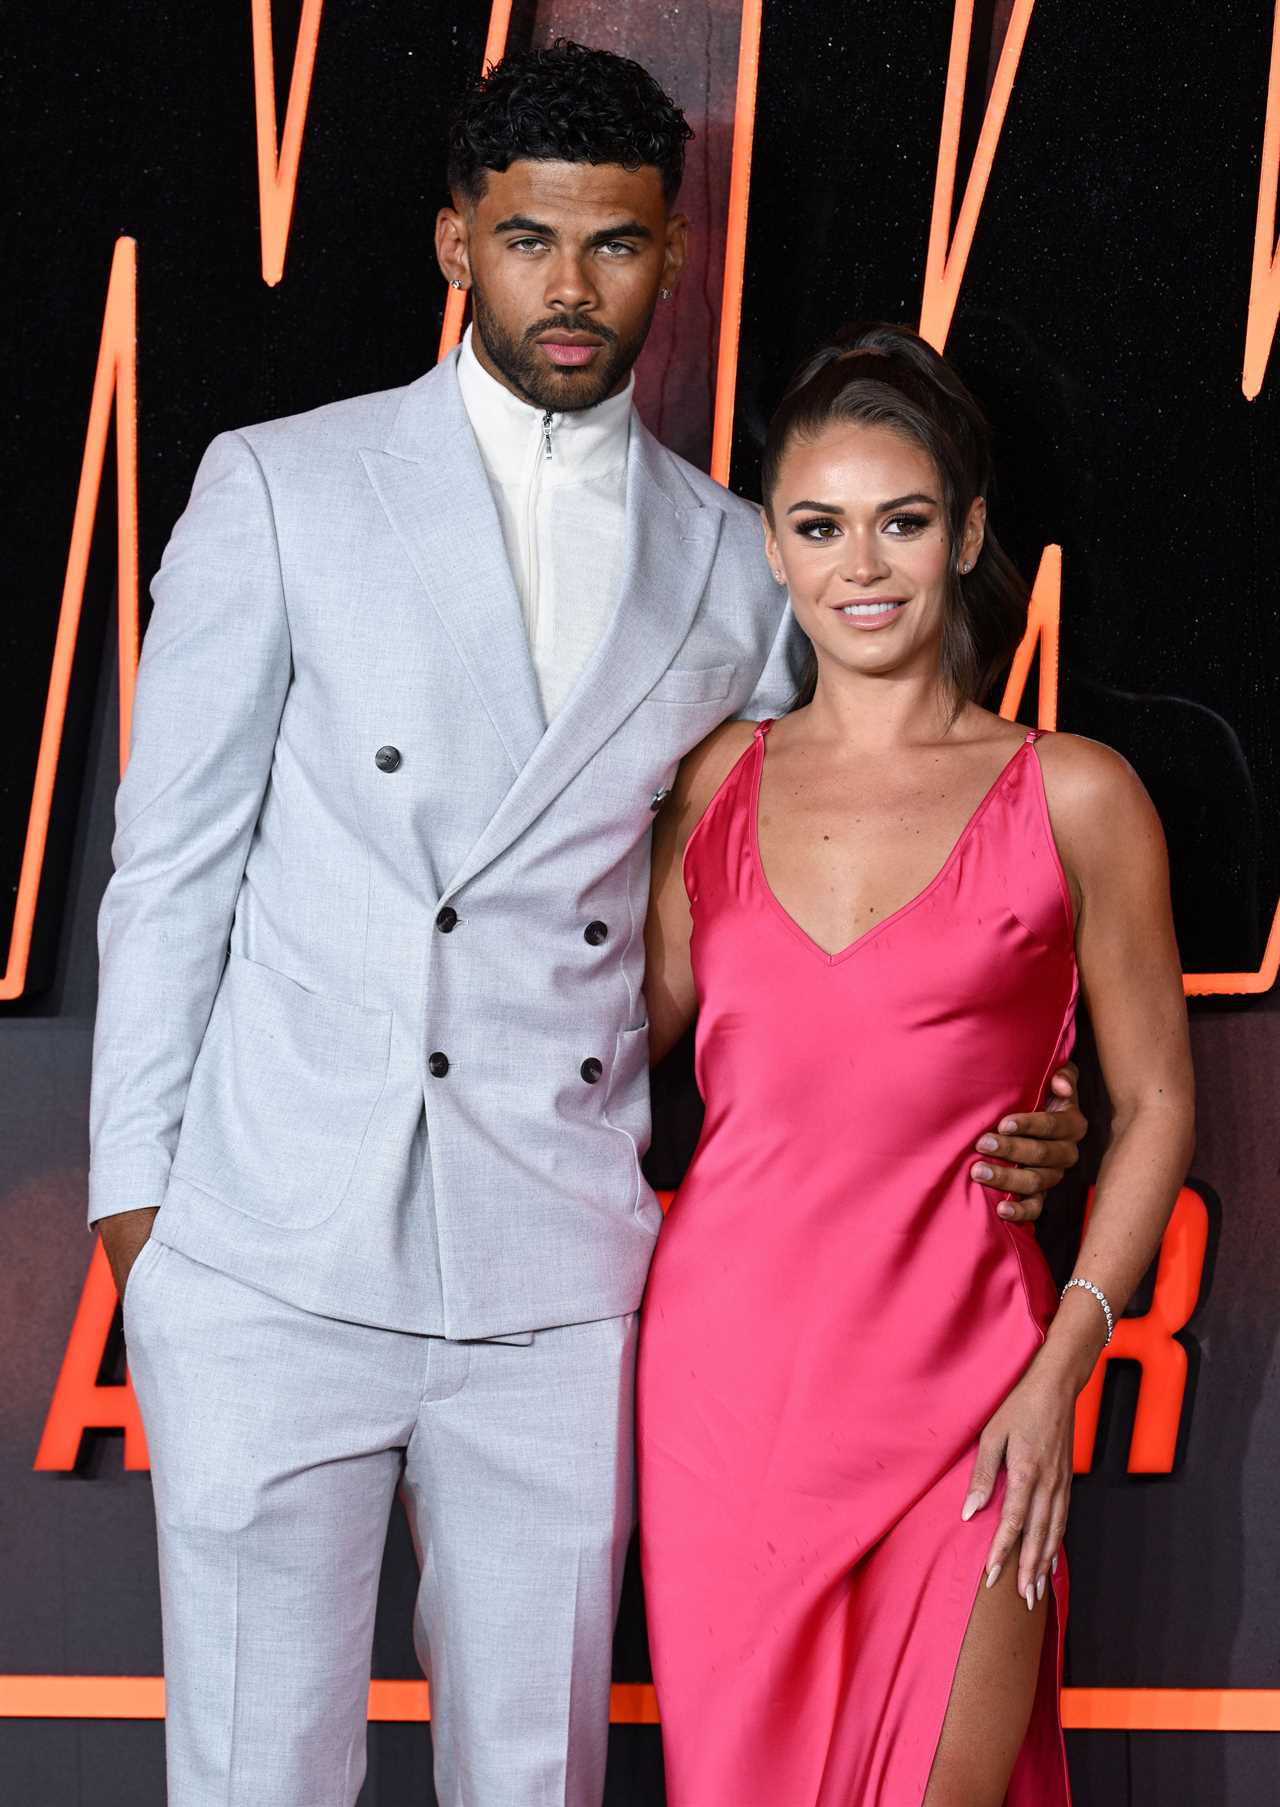 Olivia and Maxwell looked every inch the besotted couple at the John Wick 4 premiere